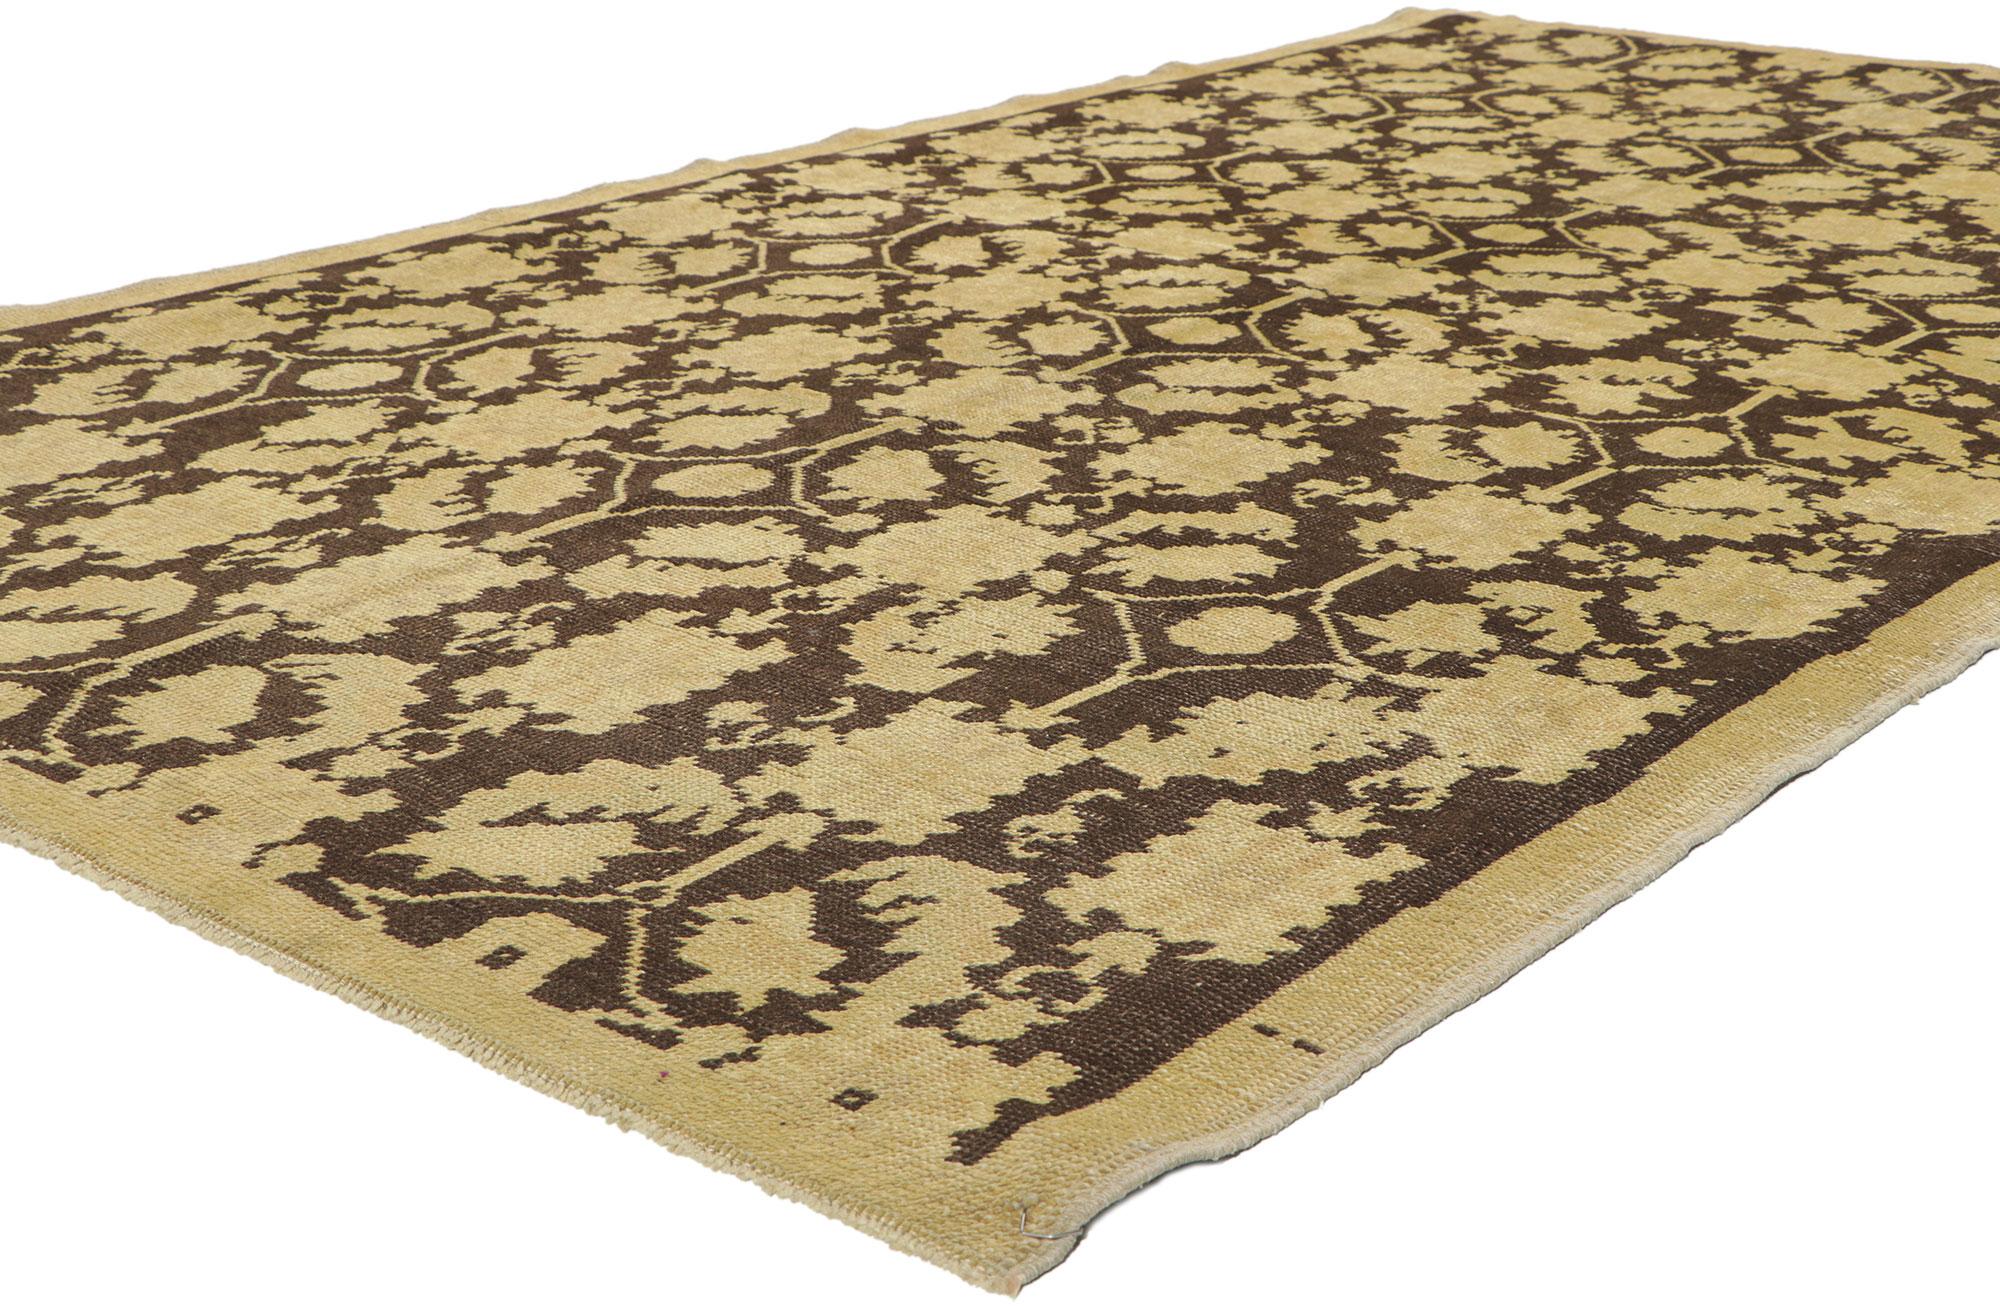 50846 Vintage Turkish Oushak Rug, 05'00 X 08'05. When Biophilic Design meets Cottagecore, it brings forth a deeply rooted connection to nature, evoking a nostalgic, romantic charm. This sentiment is captured perfectly in the hand-knotted wool